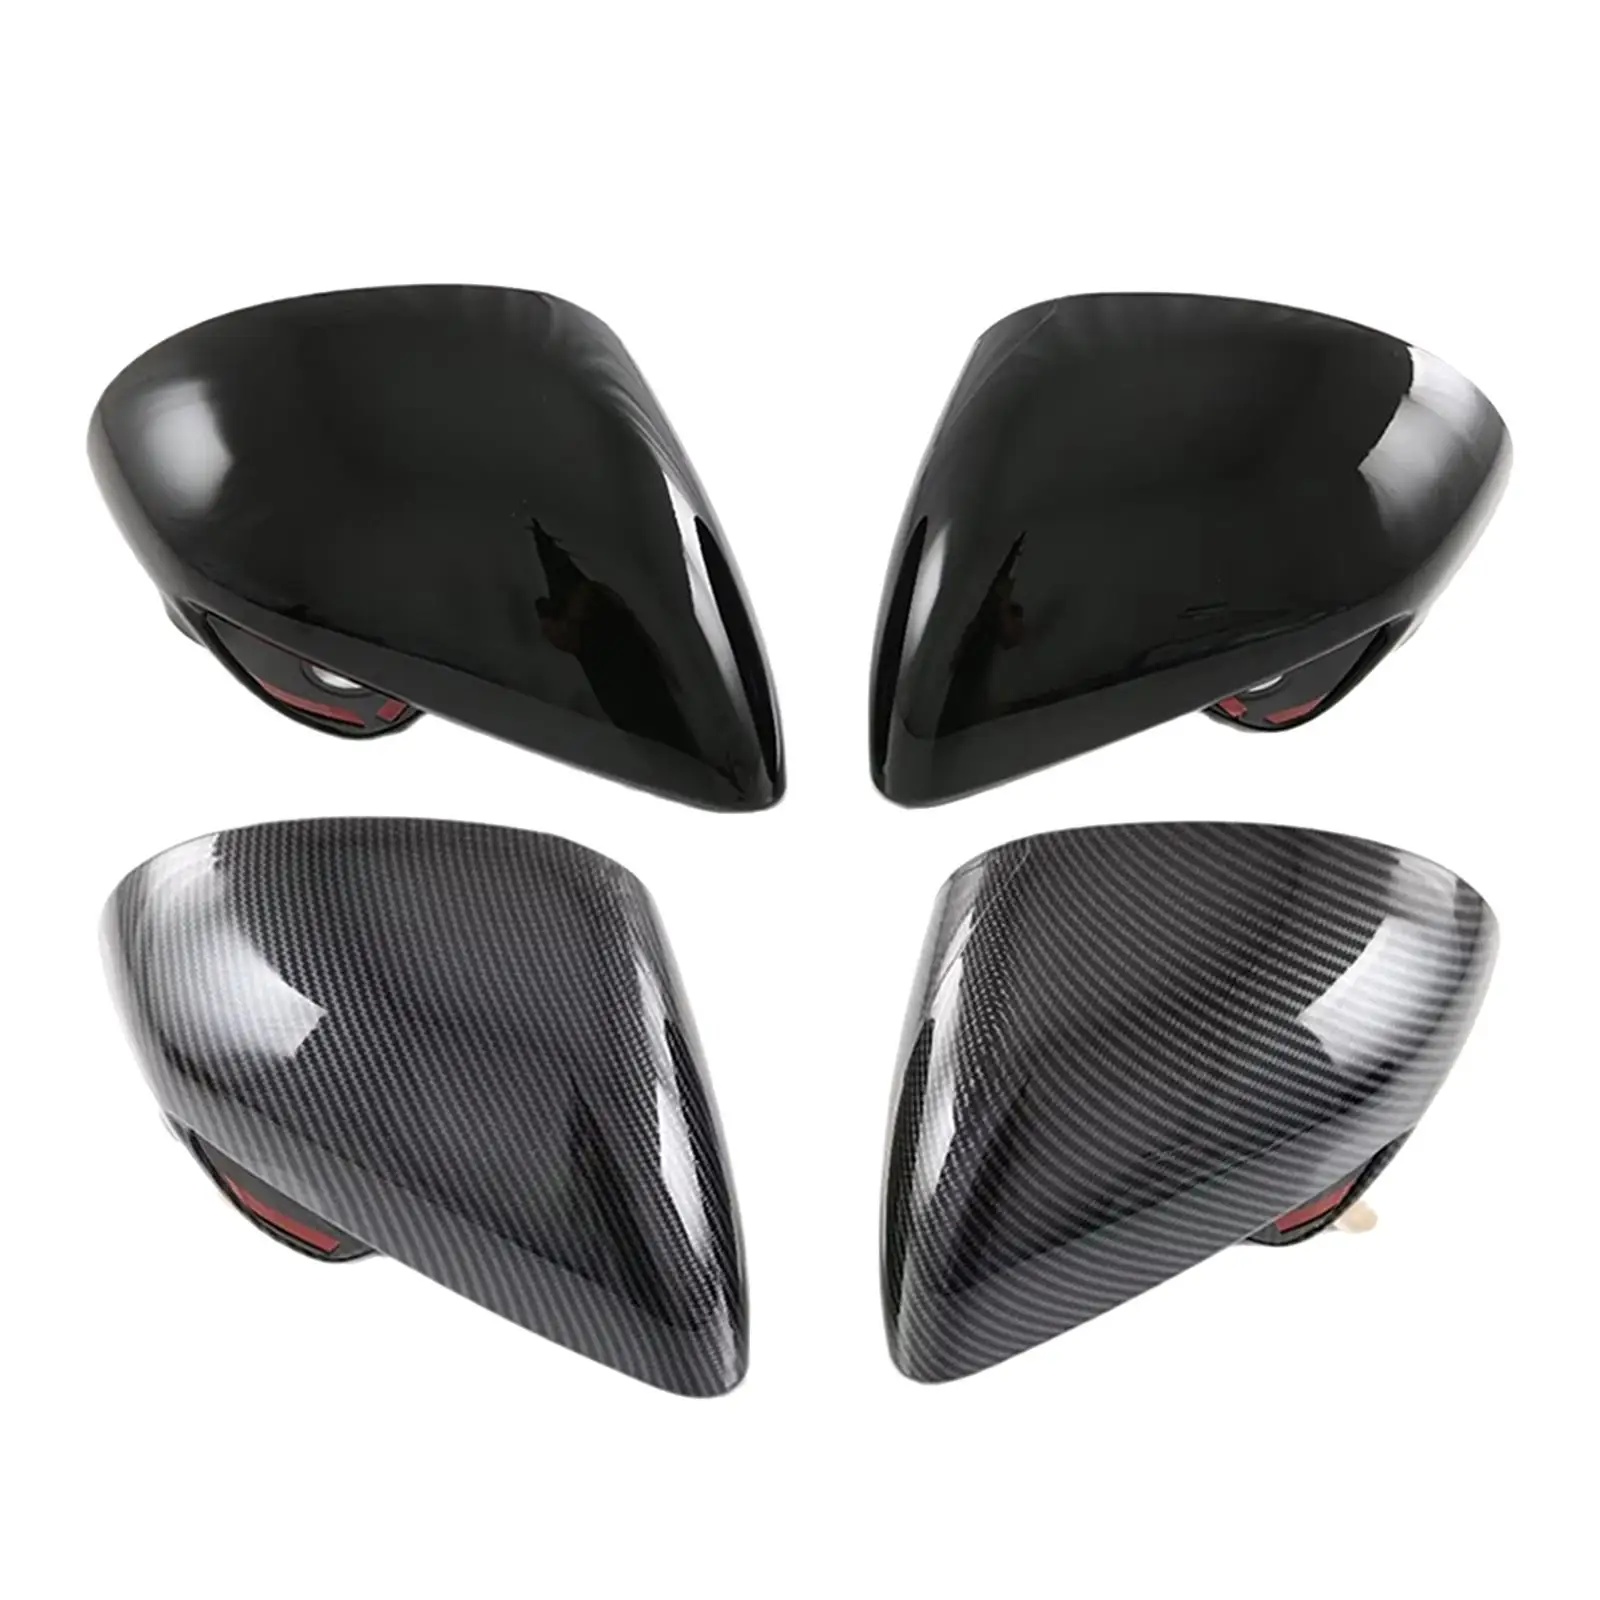 2Pcs Car Side Rear View Mirror Guard Cover Caps Trims Durable Replace for Byd Dolphin Atto 2 ea1 2022 2023 Auto Accessories